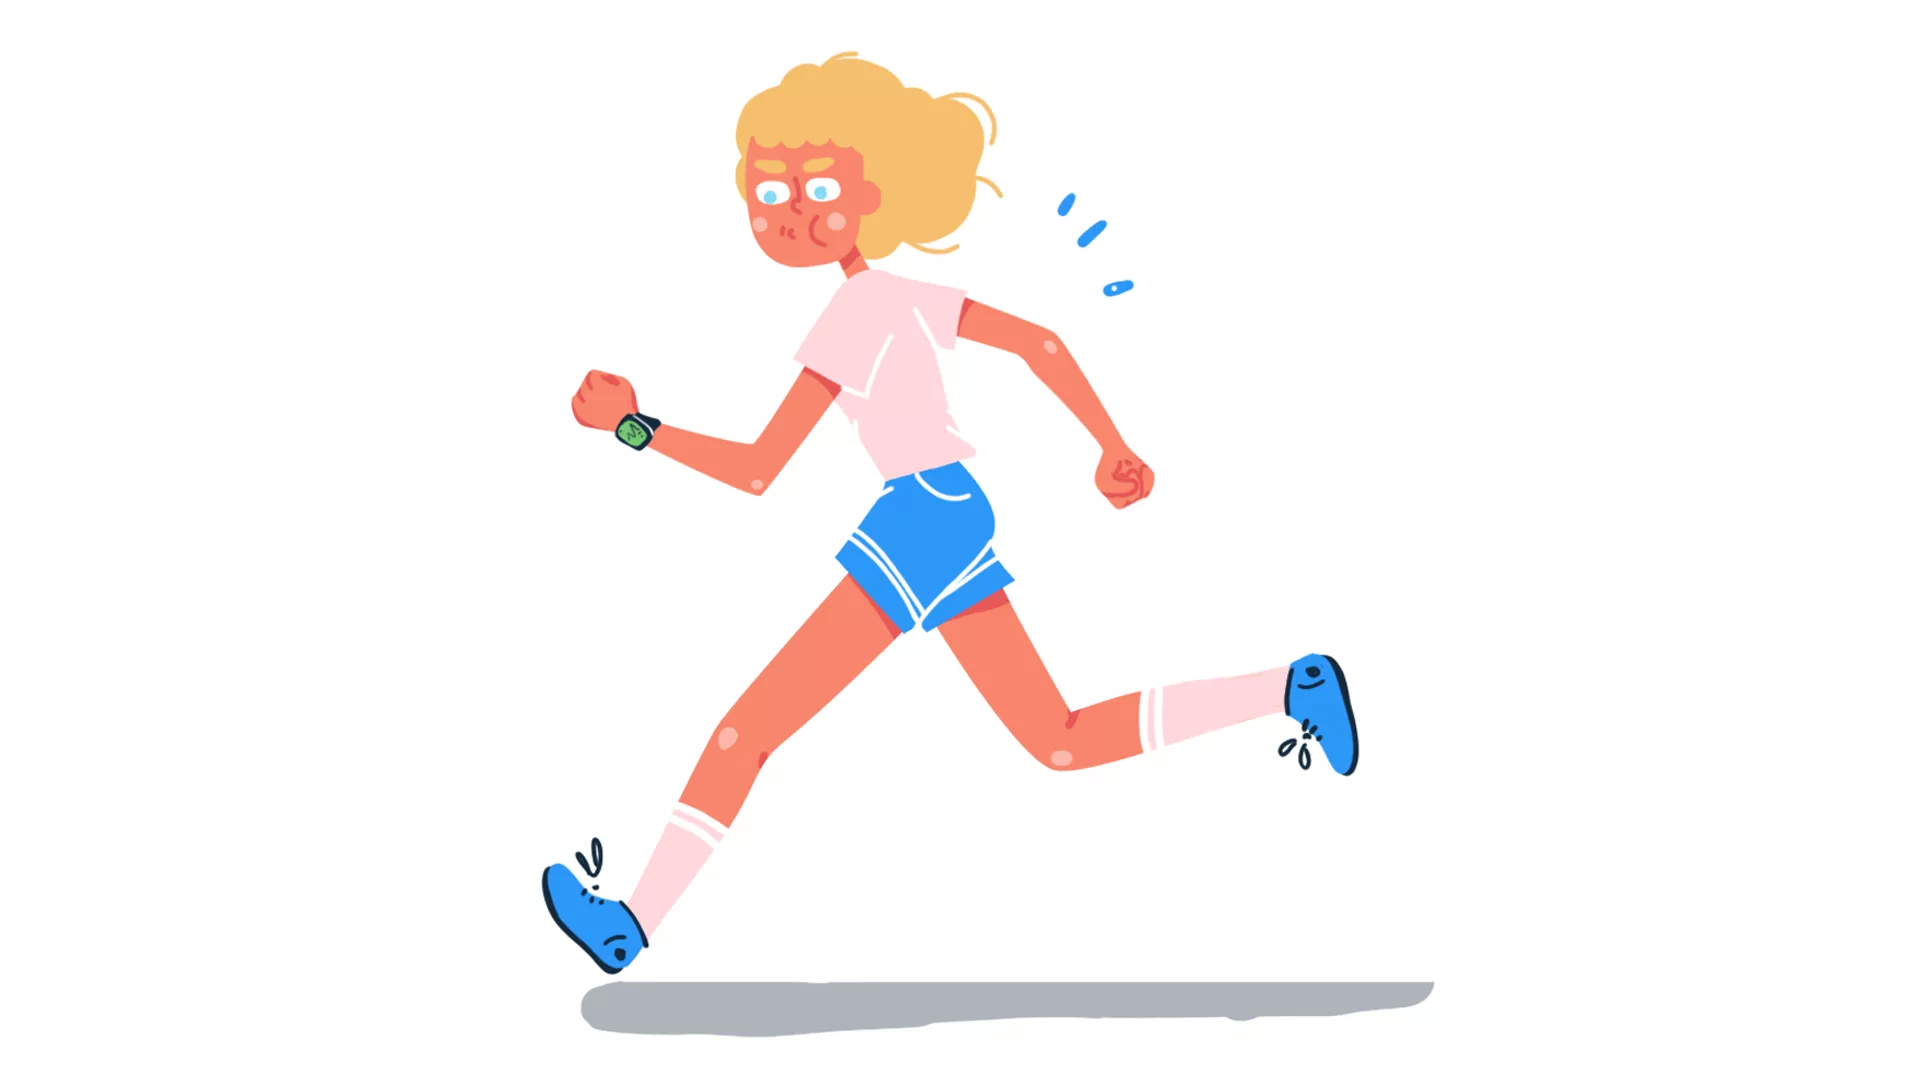 exercising helps to deal with burnout